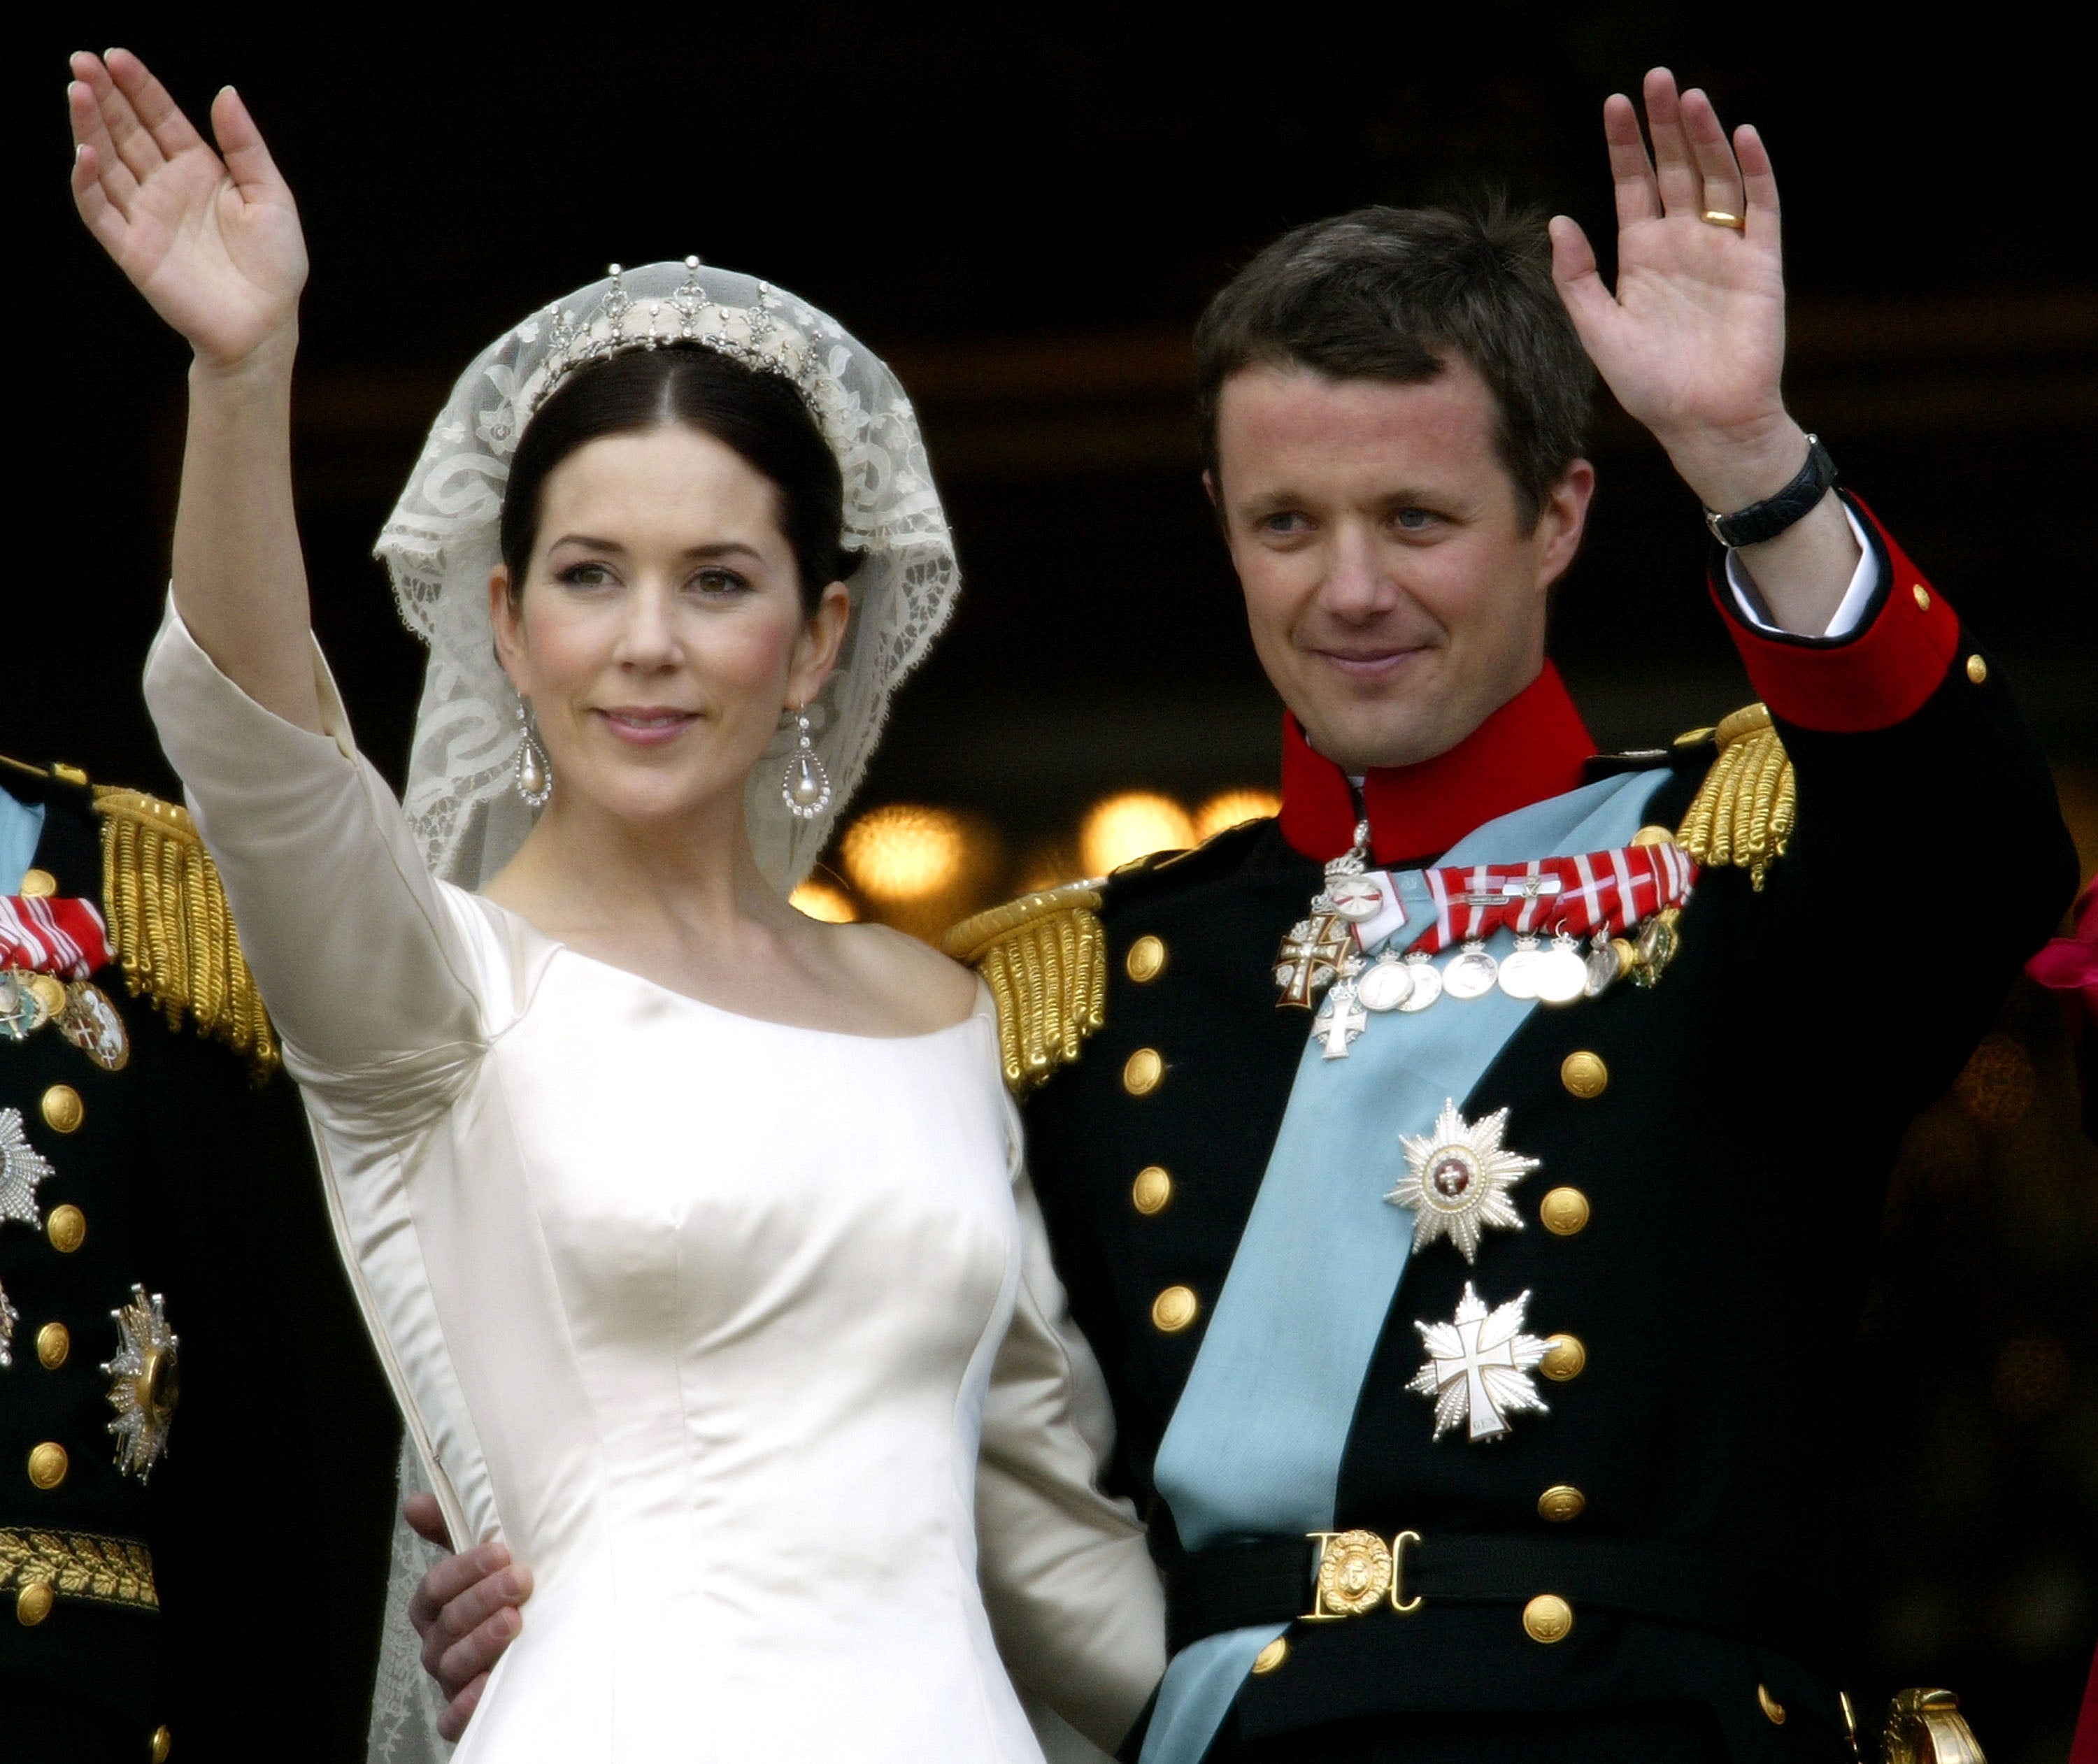 Crown Princess Mary and Crown Prince Frederik of Denmark wave from the balcony of Christian VII’s Palace after their wedding on 14 May 2004 in Copenhagen, Denmark